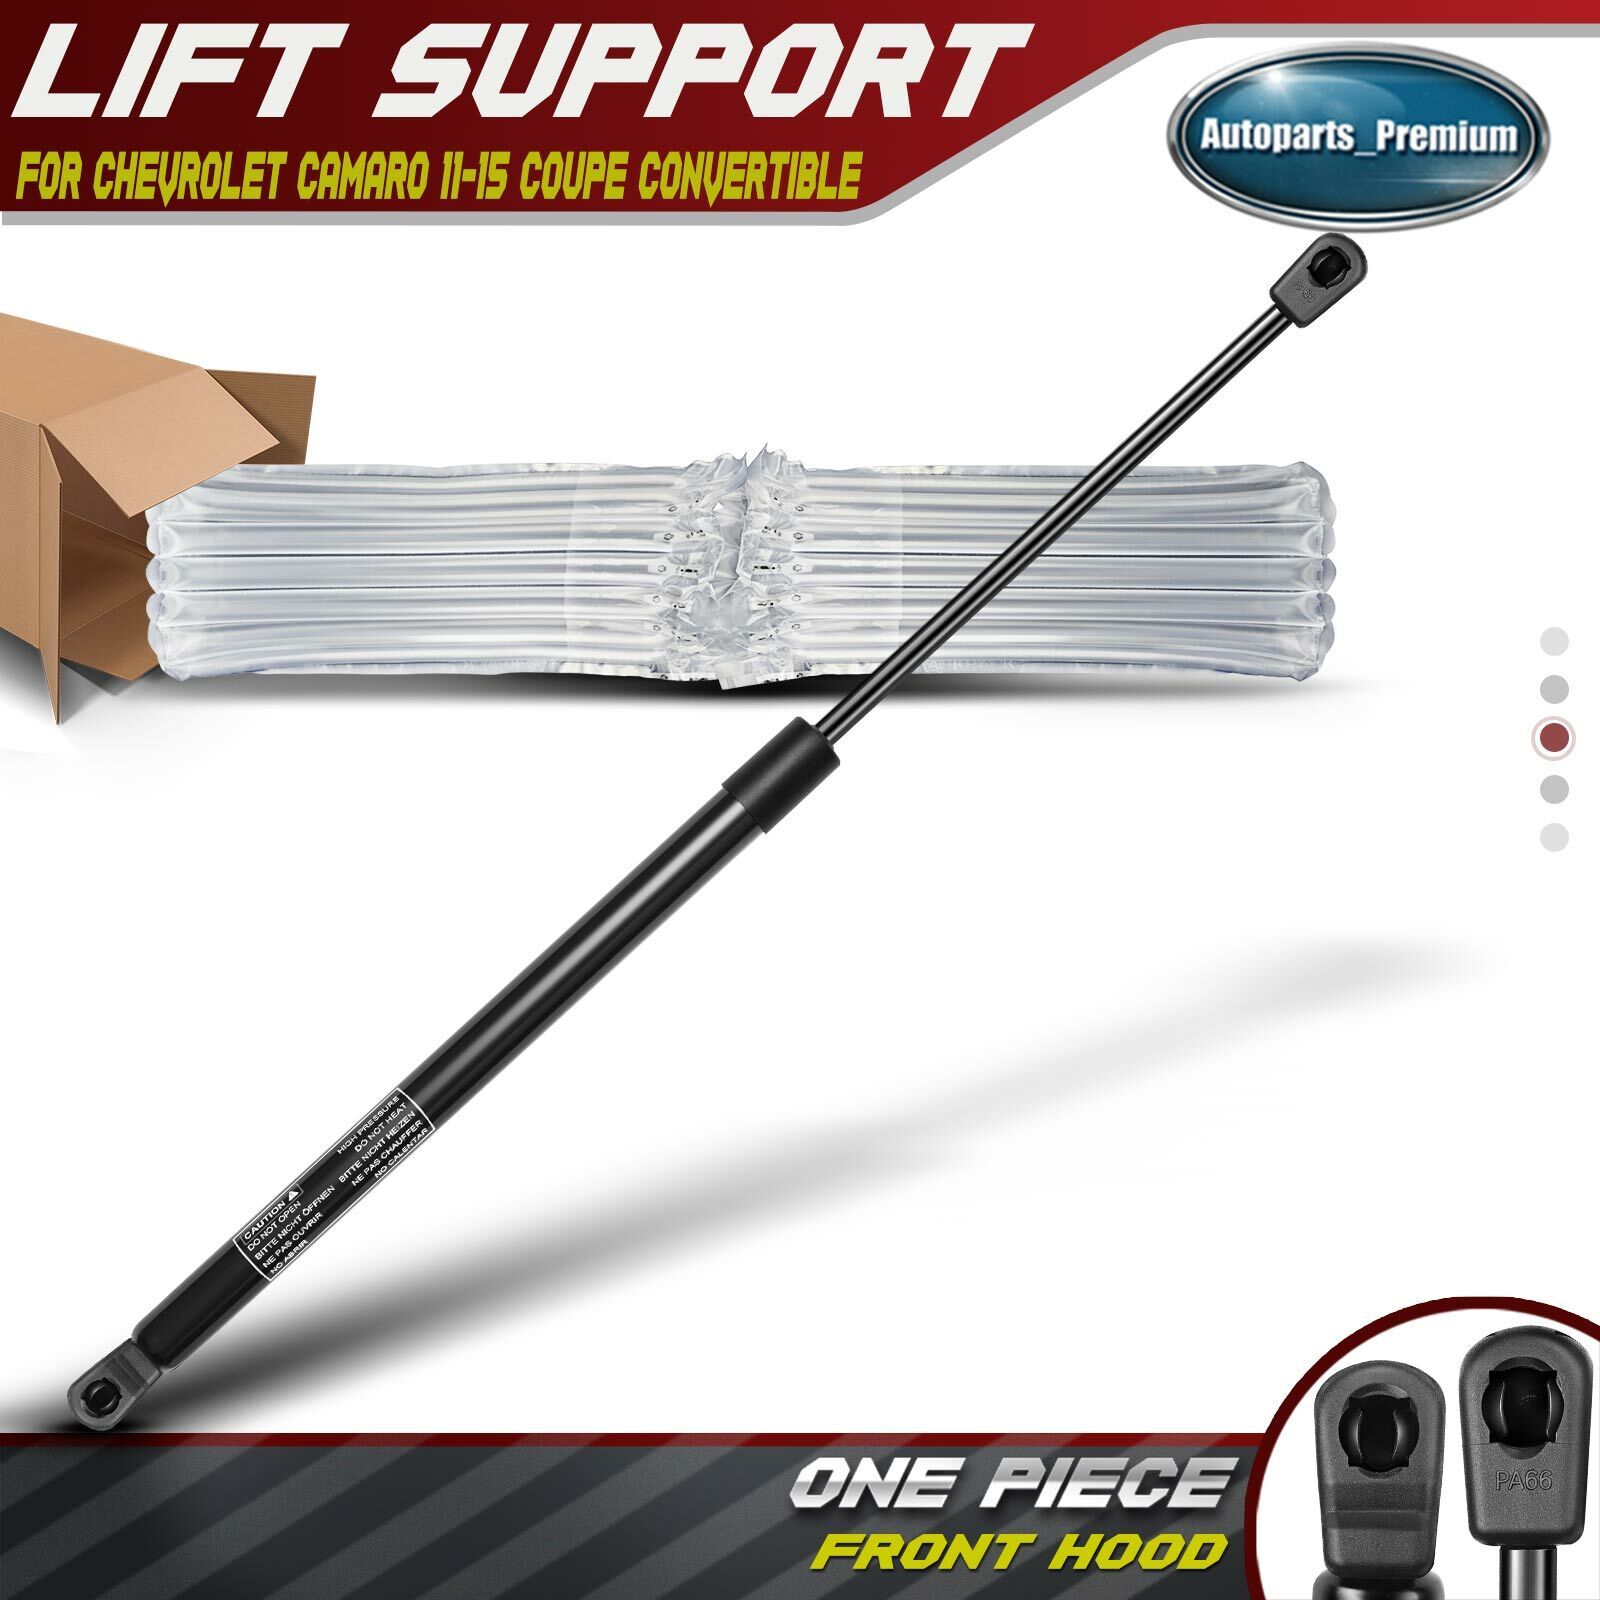 1x Hood Lift Supports Struts for Chevrolet Camaro 11-15 Coupe Convertible